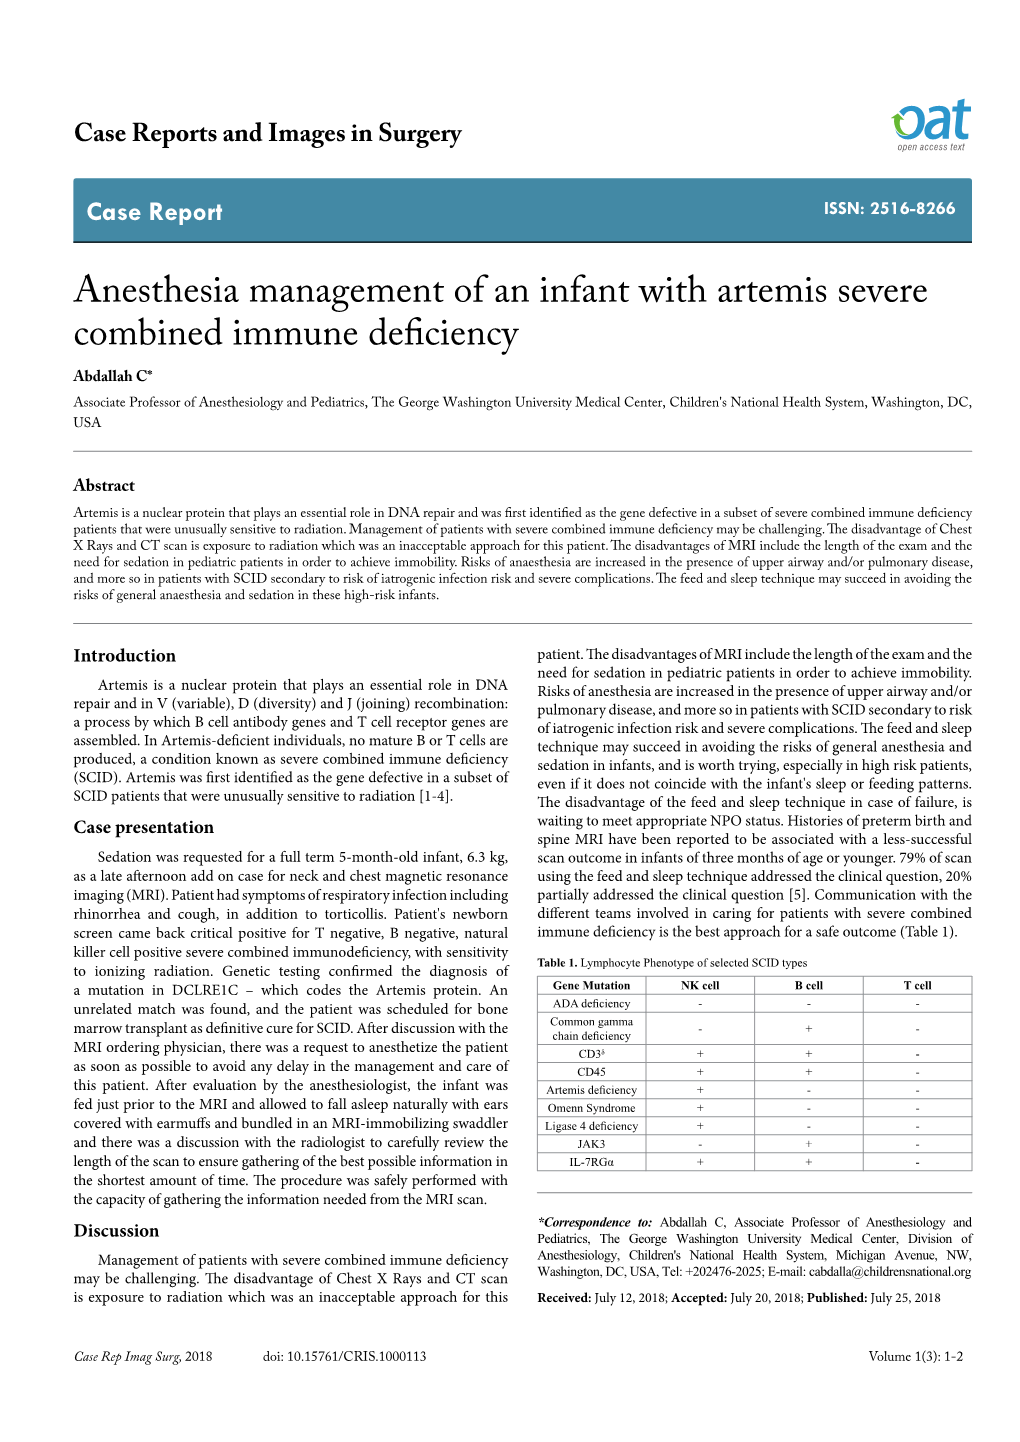 Anesthesia Management of an Infant with Artemis Severe Combined